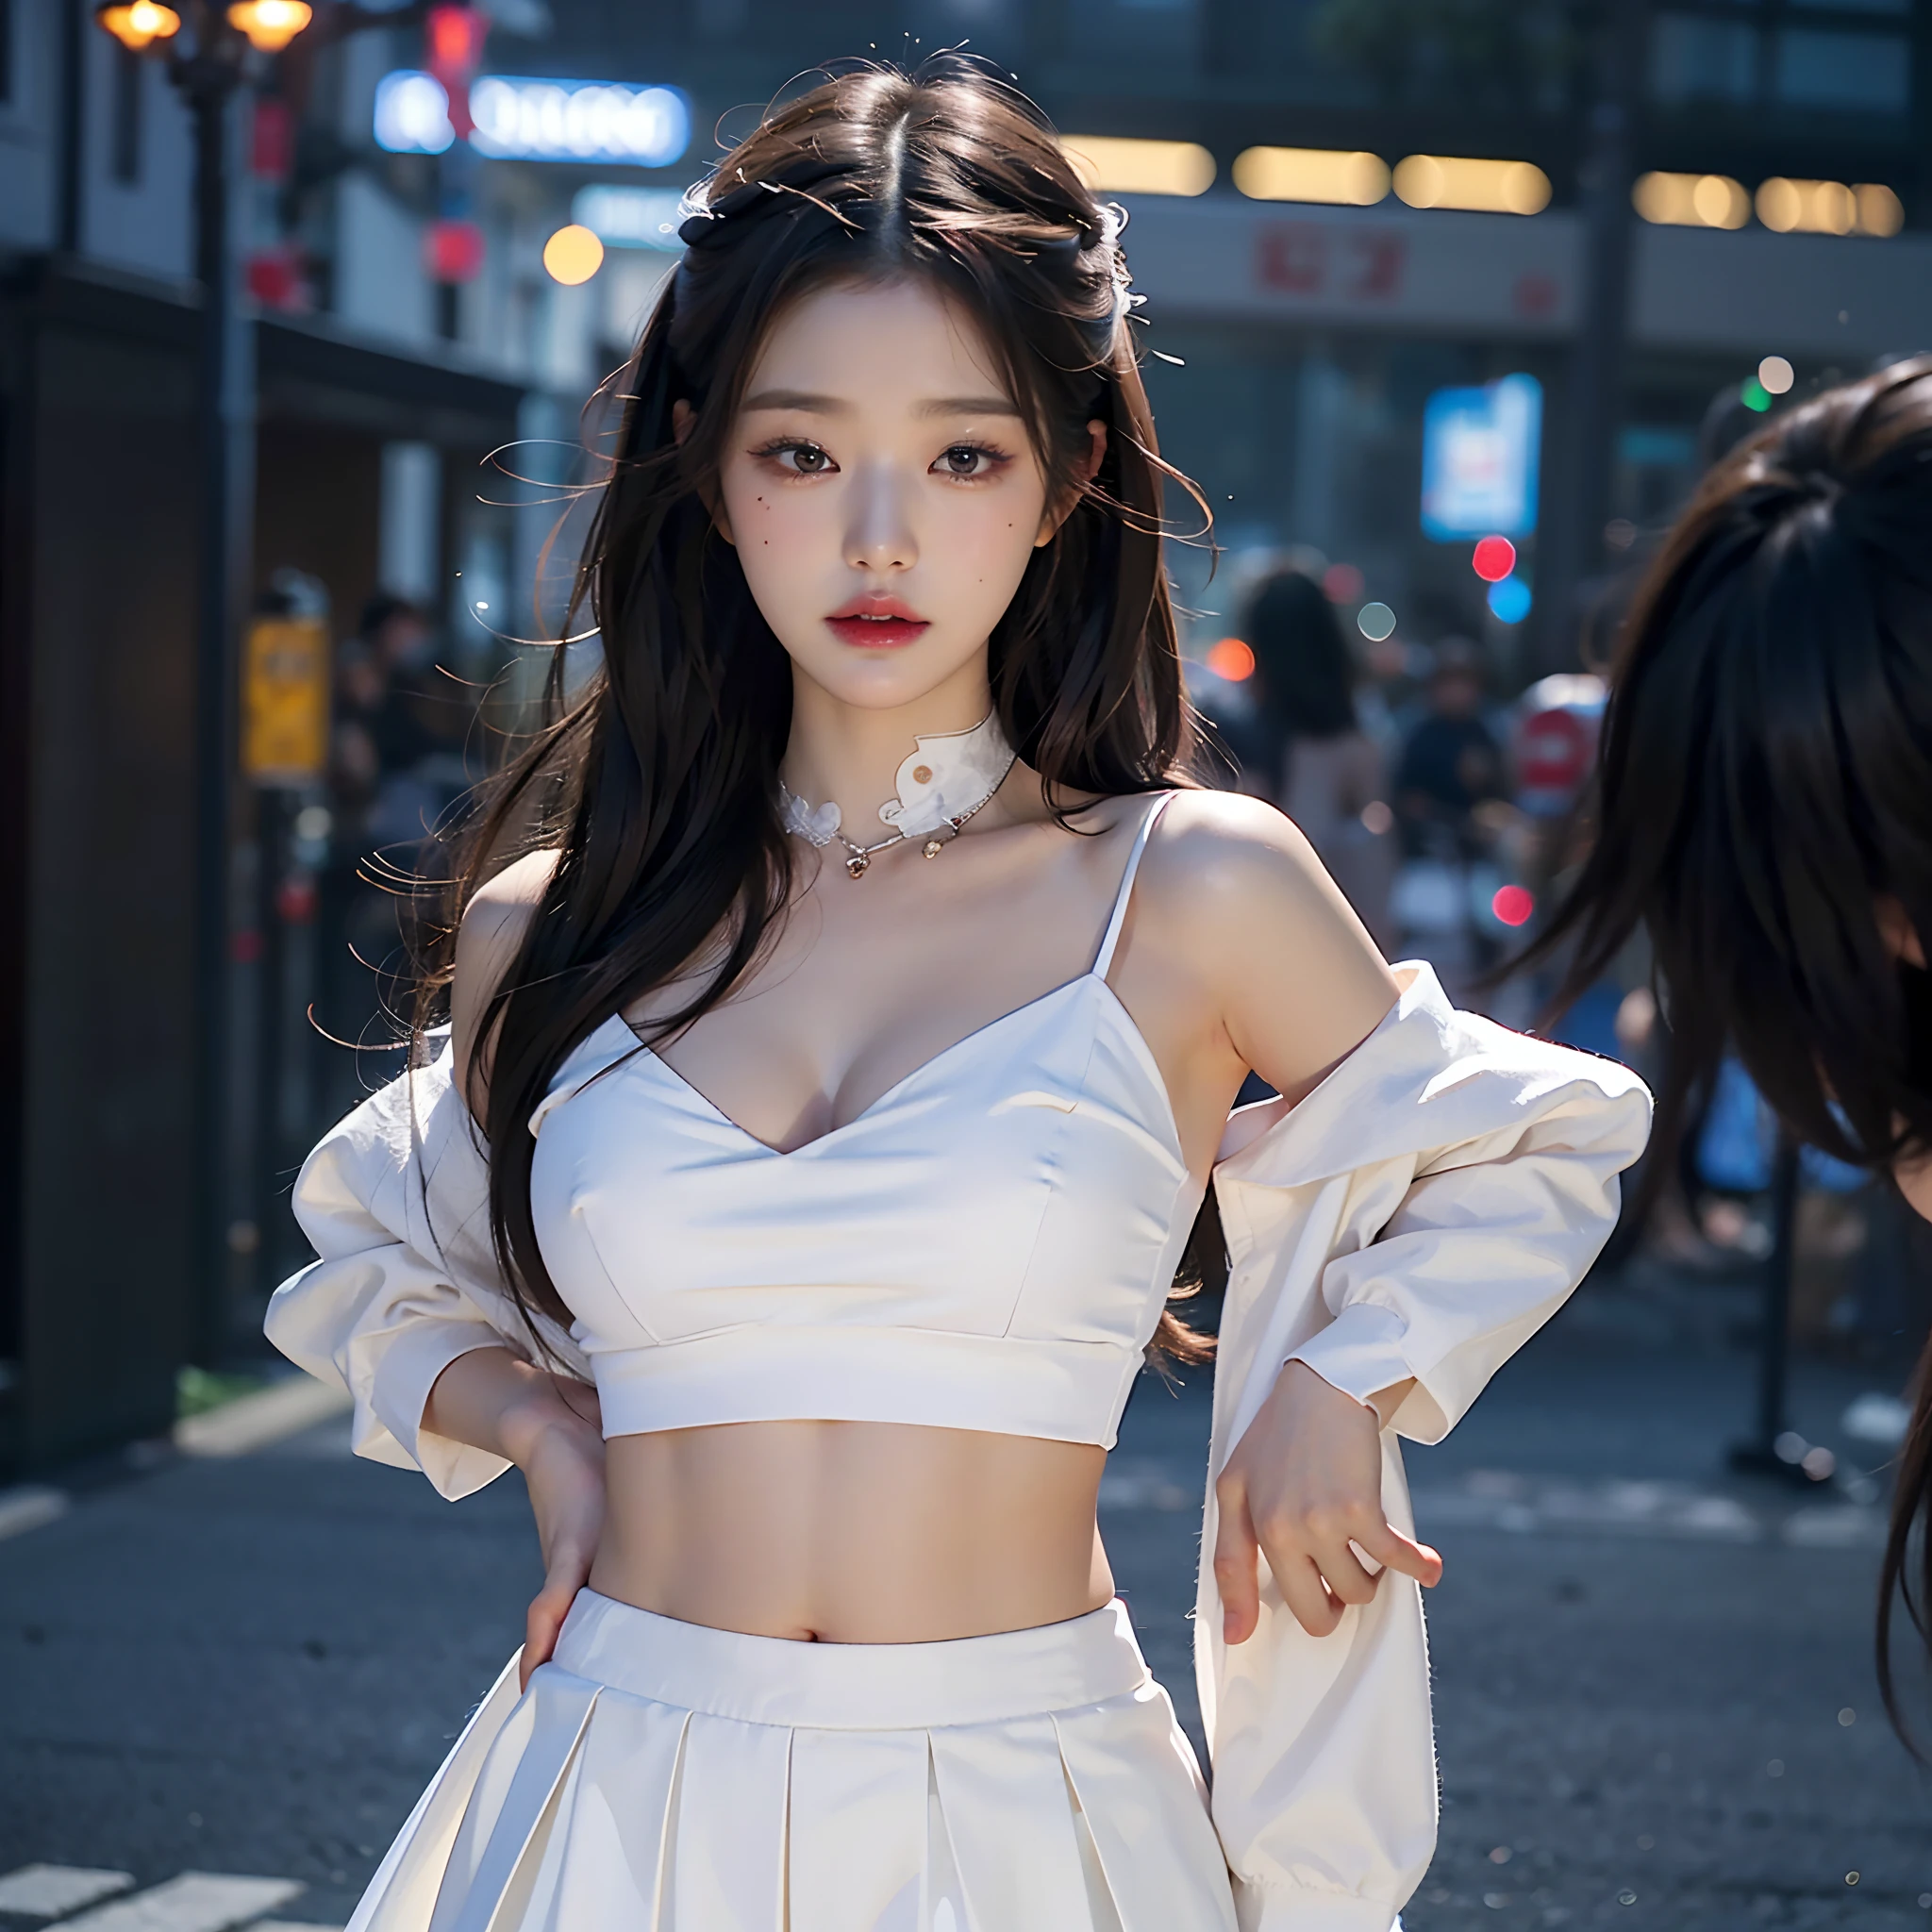 s whole body,  (realisitic:1.4),  8K UHD,  Top  Quality,  The ultra-Highres,  Unique Backgrounds,  clouds,  Dark and very dark.......,  Building lights are lighting up the night.......,  wind:1.3,  (Wearing a crop top and a short skirt),  (images:1.1),  kpop-idol,  (Beautiful girl in Korea),  (Mixed Korean),  (Pretty lips:1.1),  (eyeslashes:1.1),  (happiness:1.21),  (deeply:1.1), (Neat makeup),  (Clear facial skin: 1.2),  (Glowing skin),  (Big breasts),